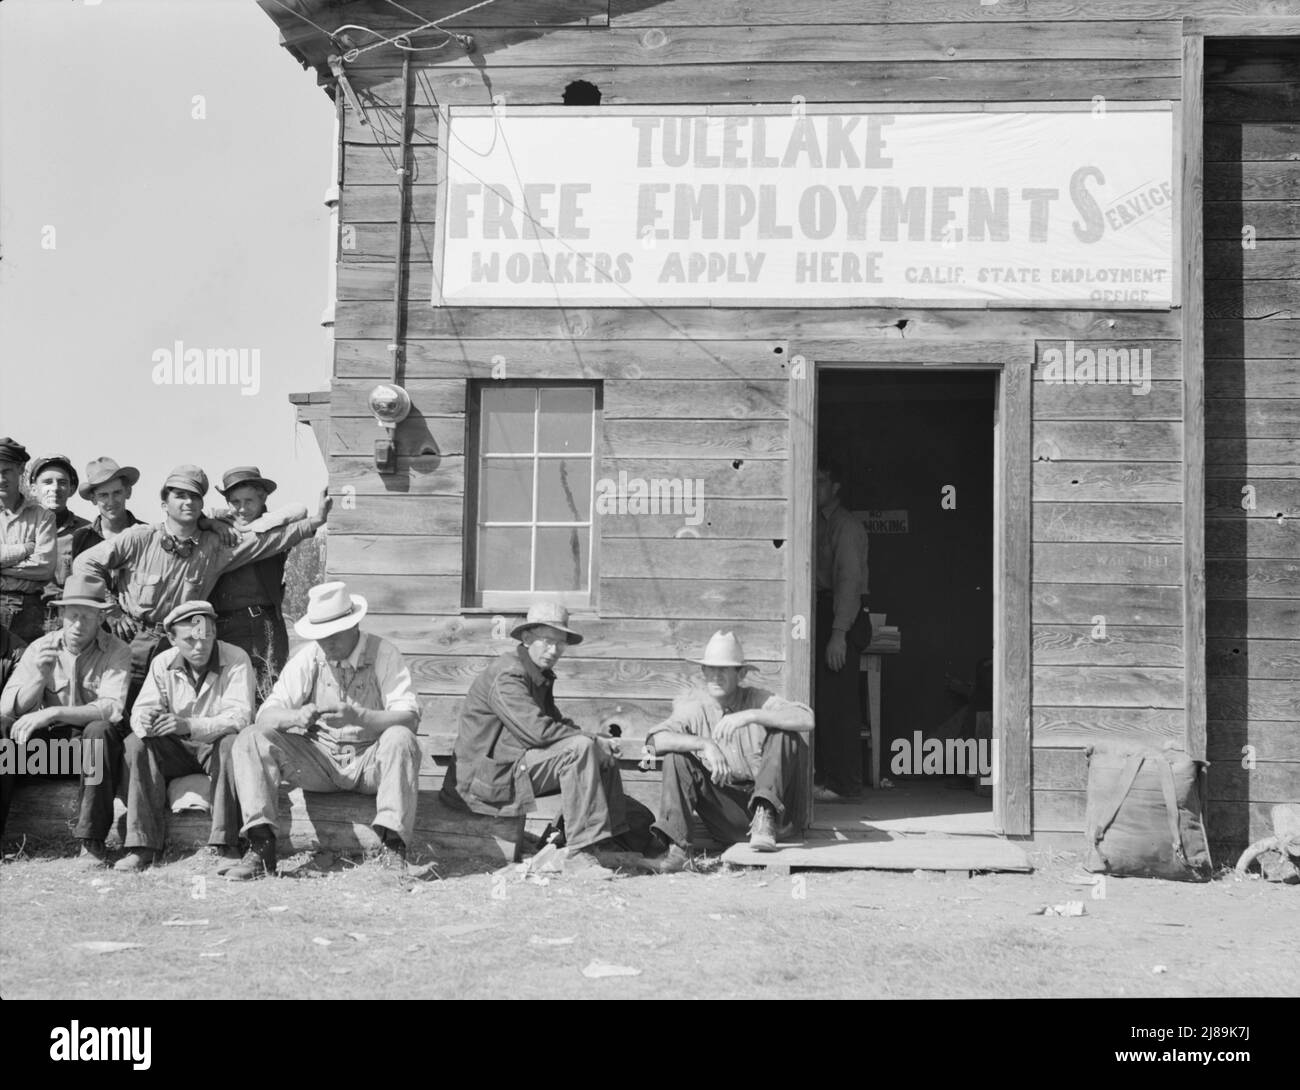 California State Employment Service office. Tulelake, Siskiyou County, California. This office is 500 yards from potato pickers camp. This office made 2,452 individual placements to growers in five weeks (season of 1938). [Sign: 'Tulelake Free Employment Service - Workers Apply Here']. Stock Photo